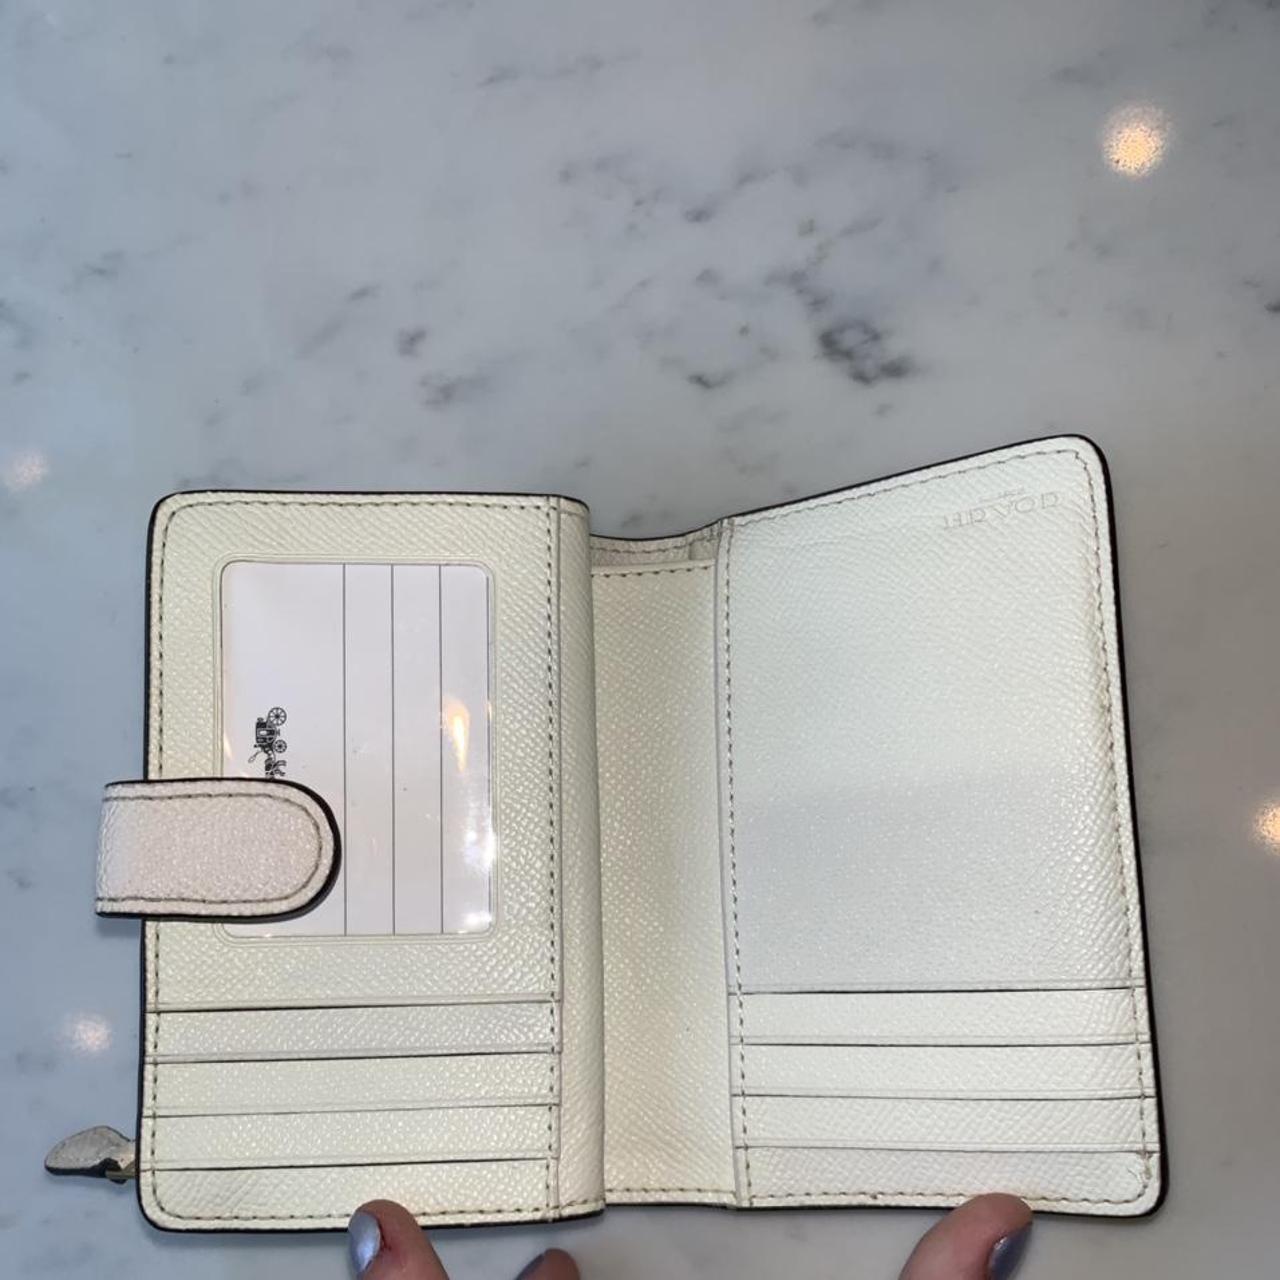 Product Image 4 - WHITE COACH wallet/clutch! 🤍🤍🤍
Gold trim.